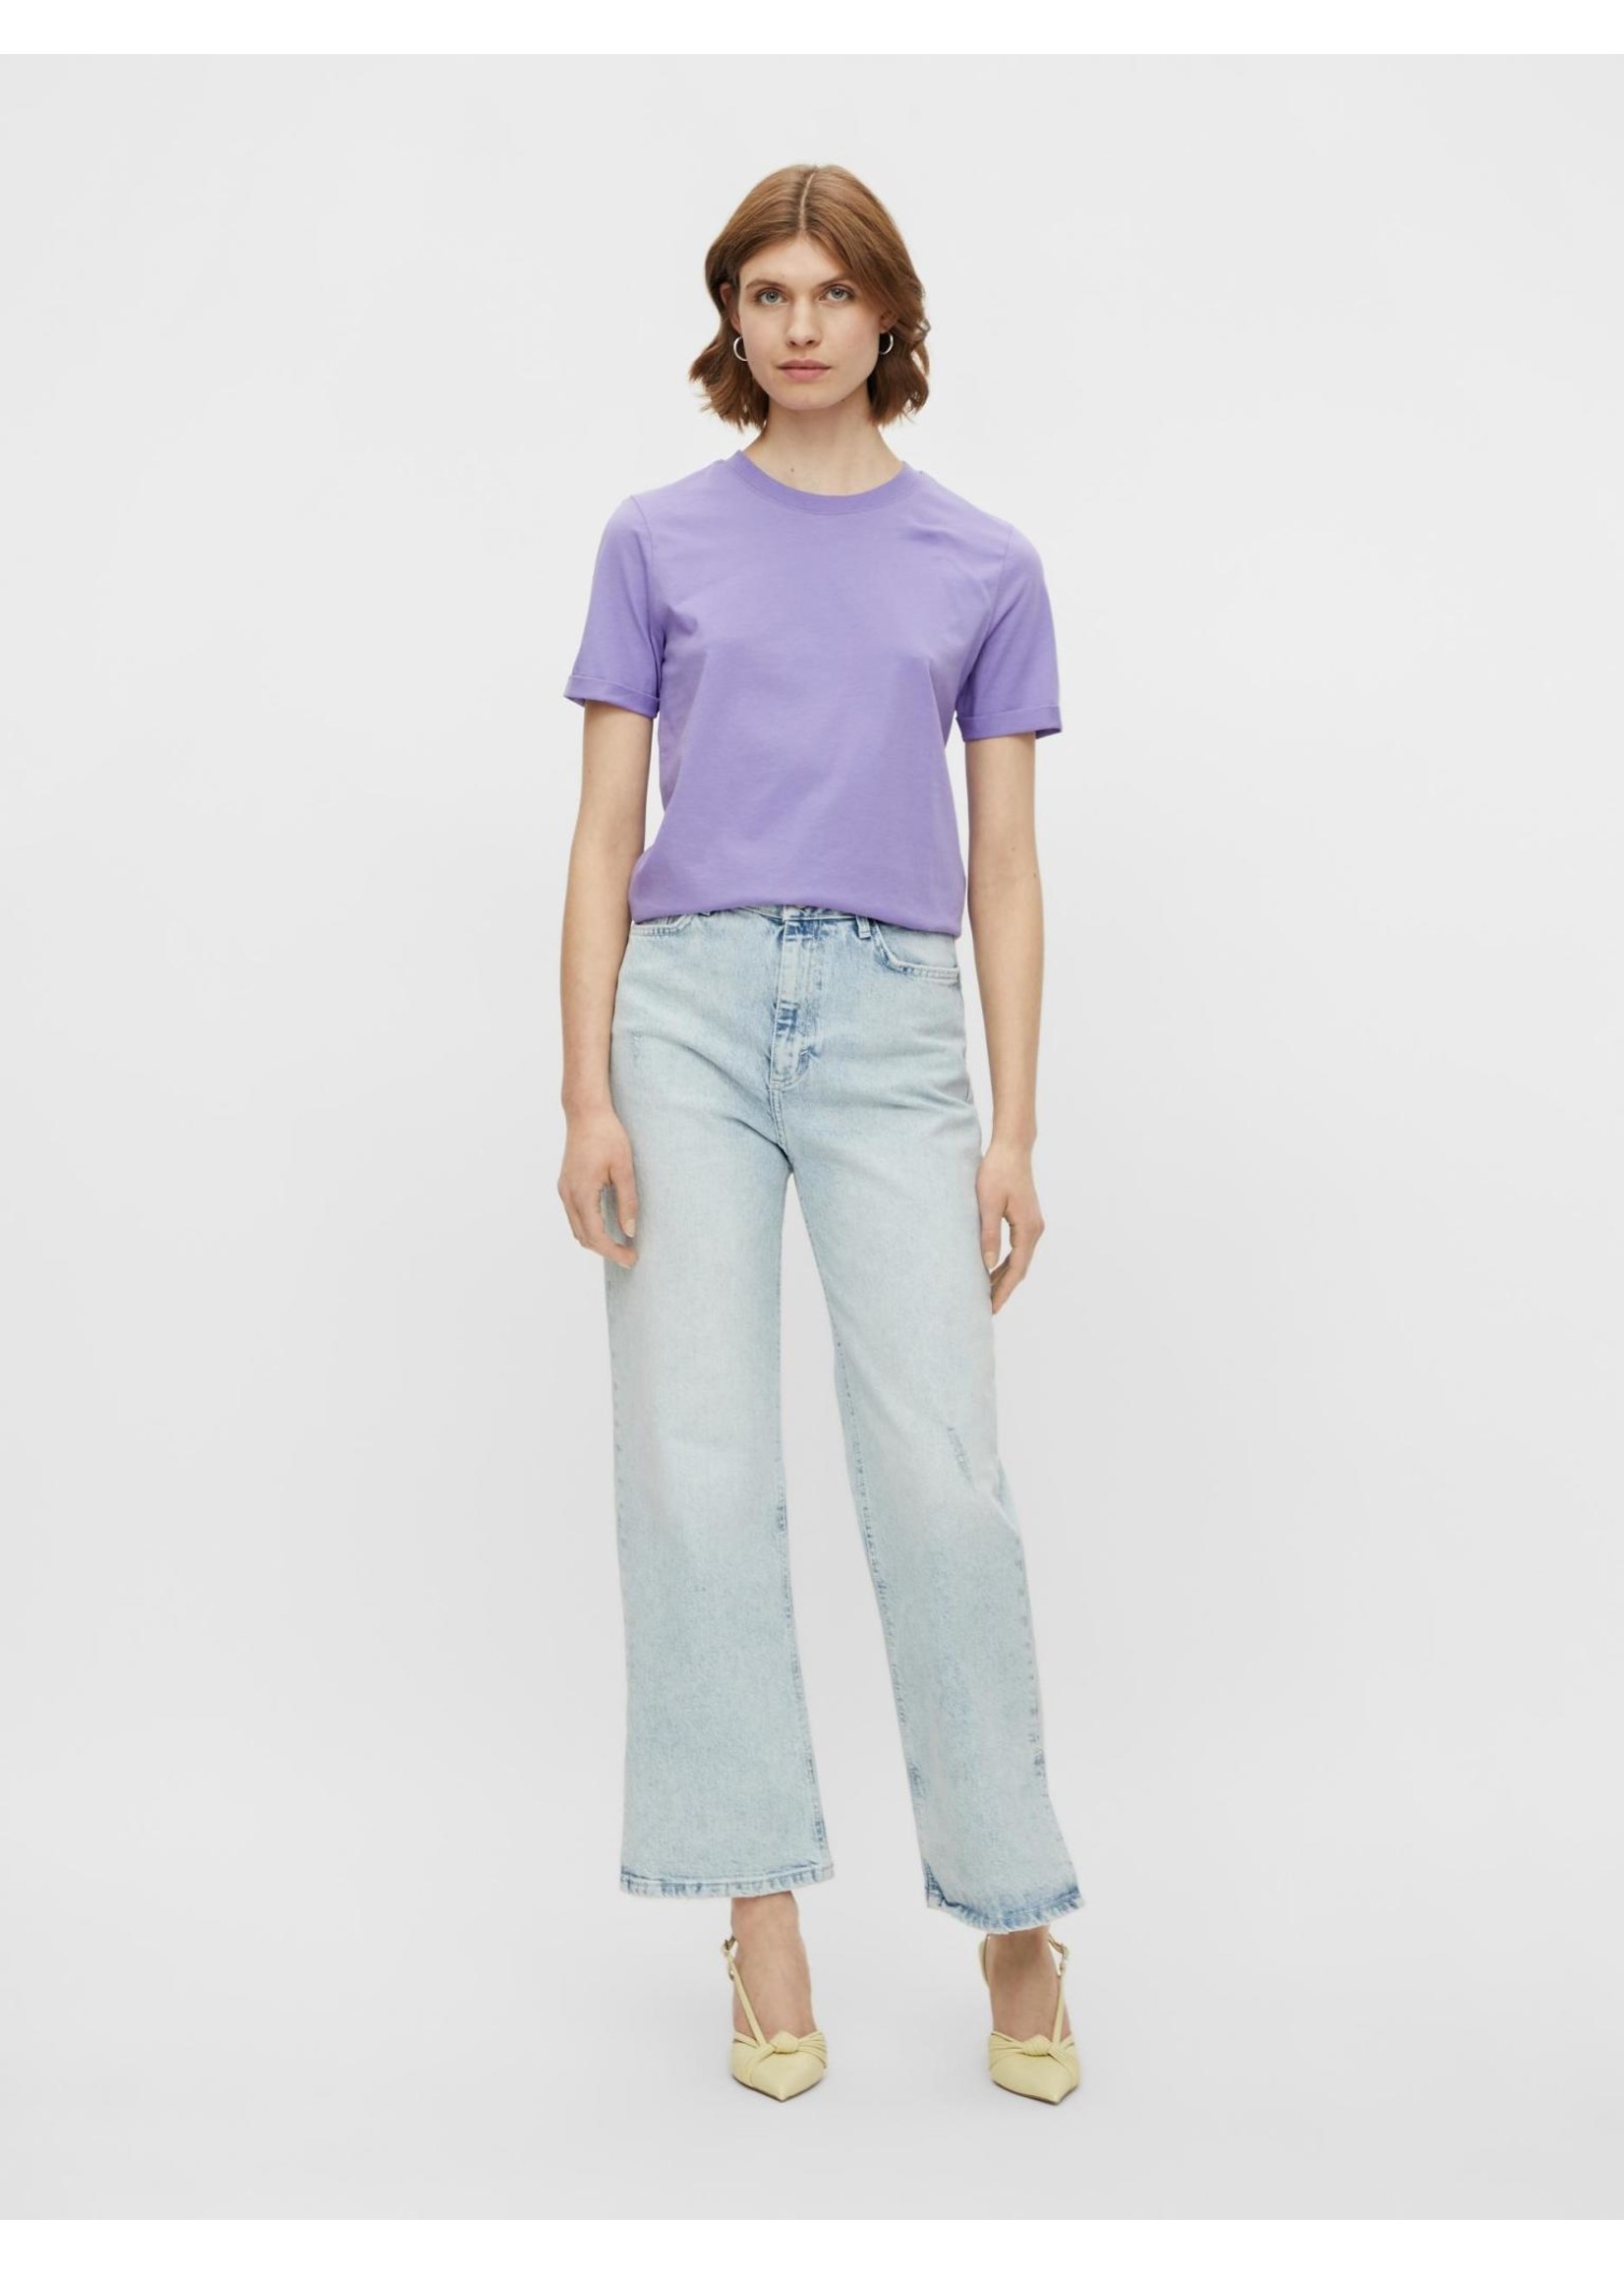 PIECES RIA SS FOLD UP SOLID TEE NOOS BC dahlia purple